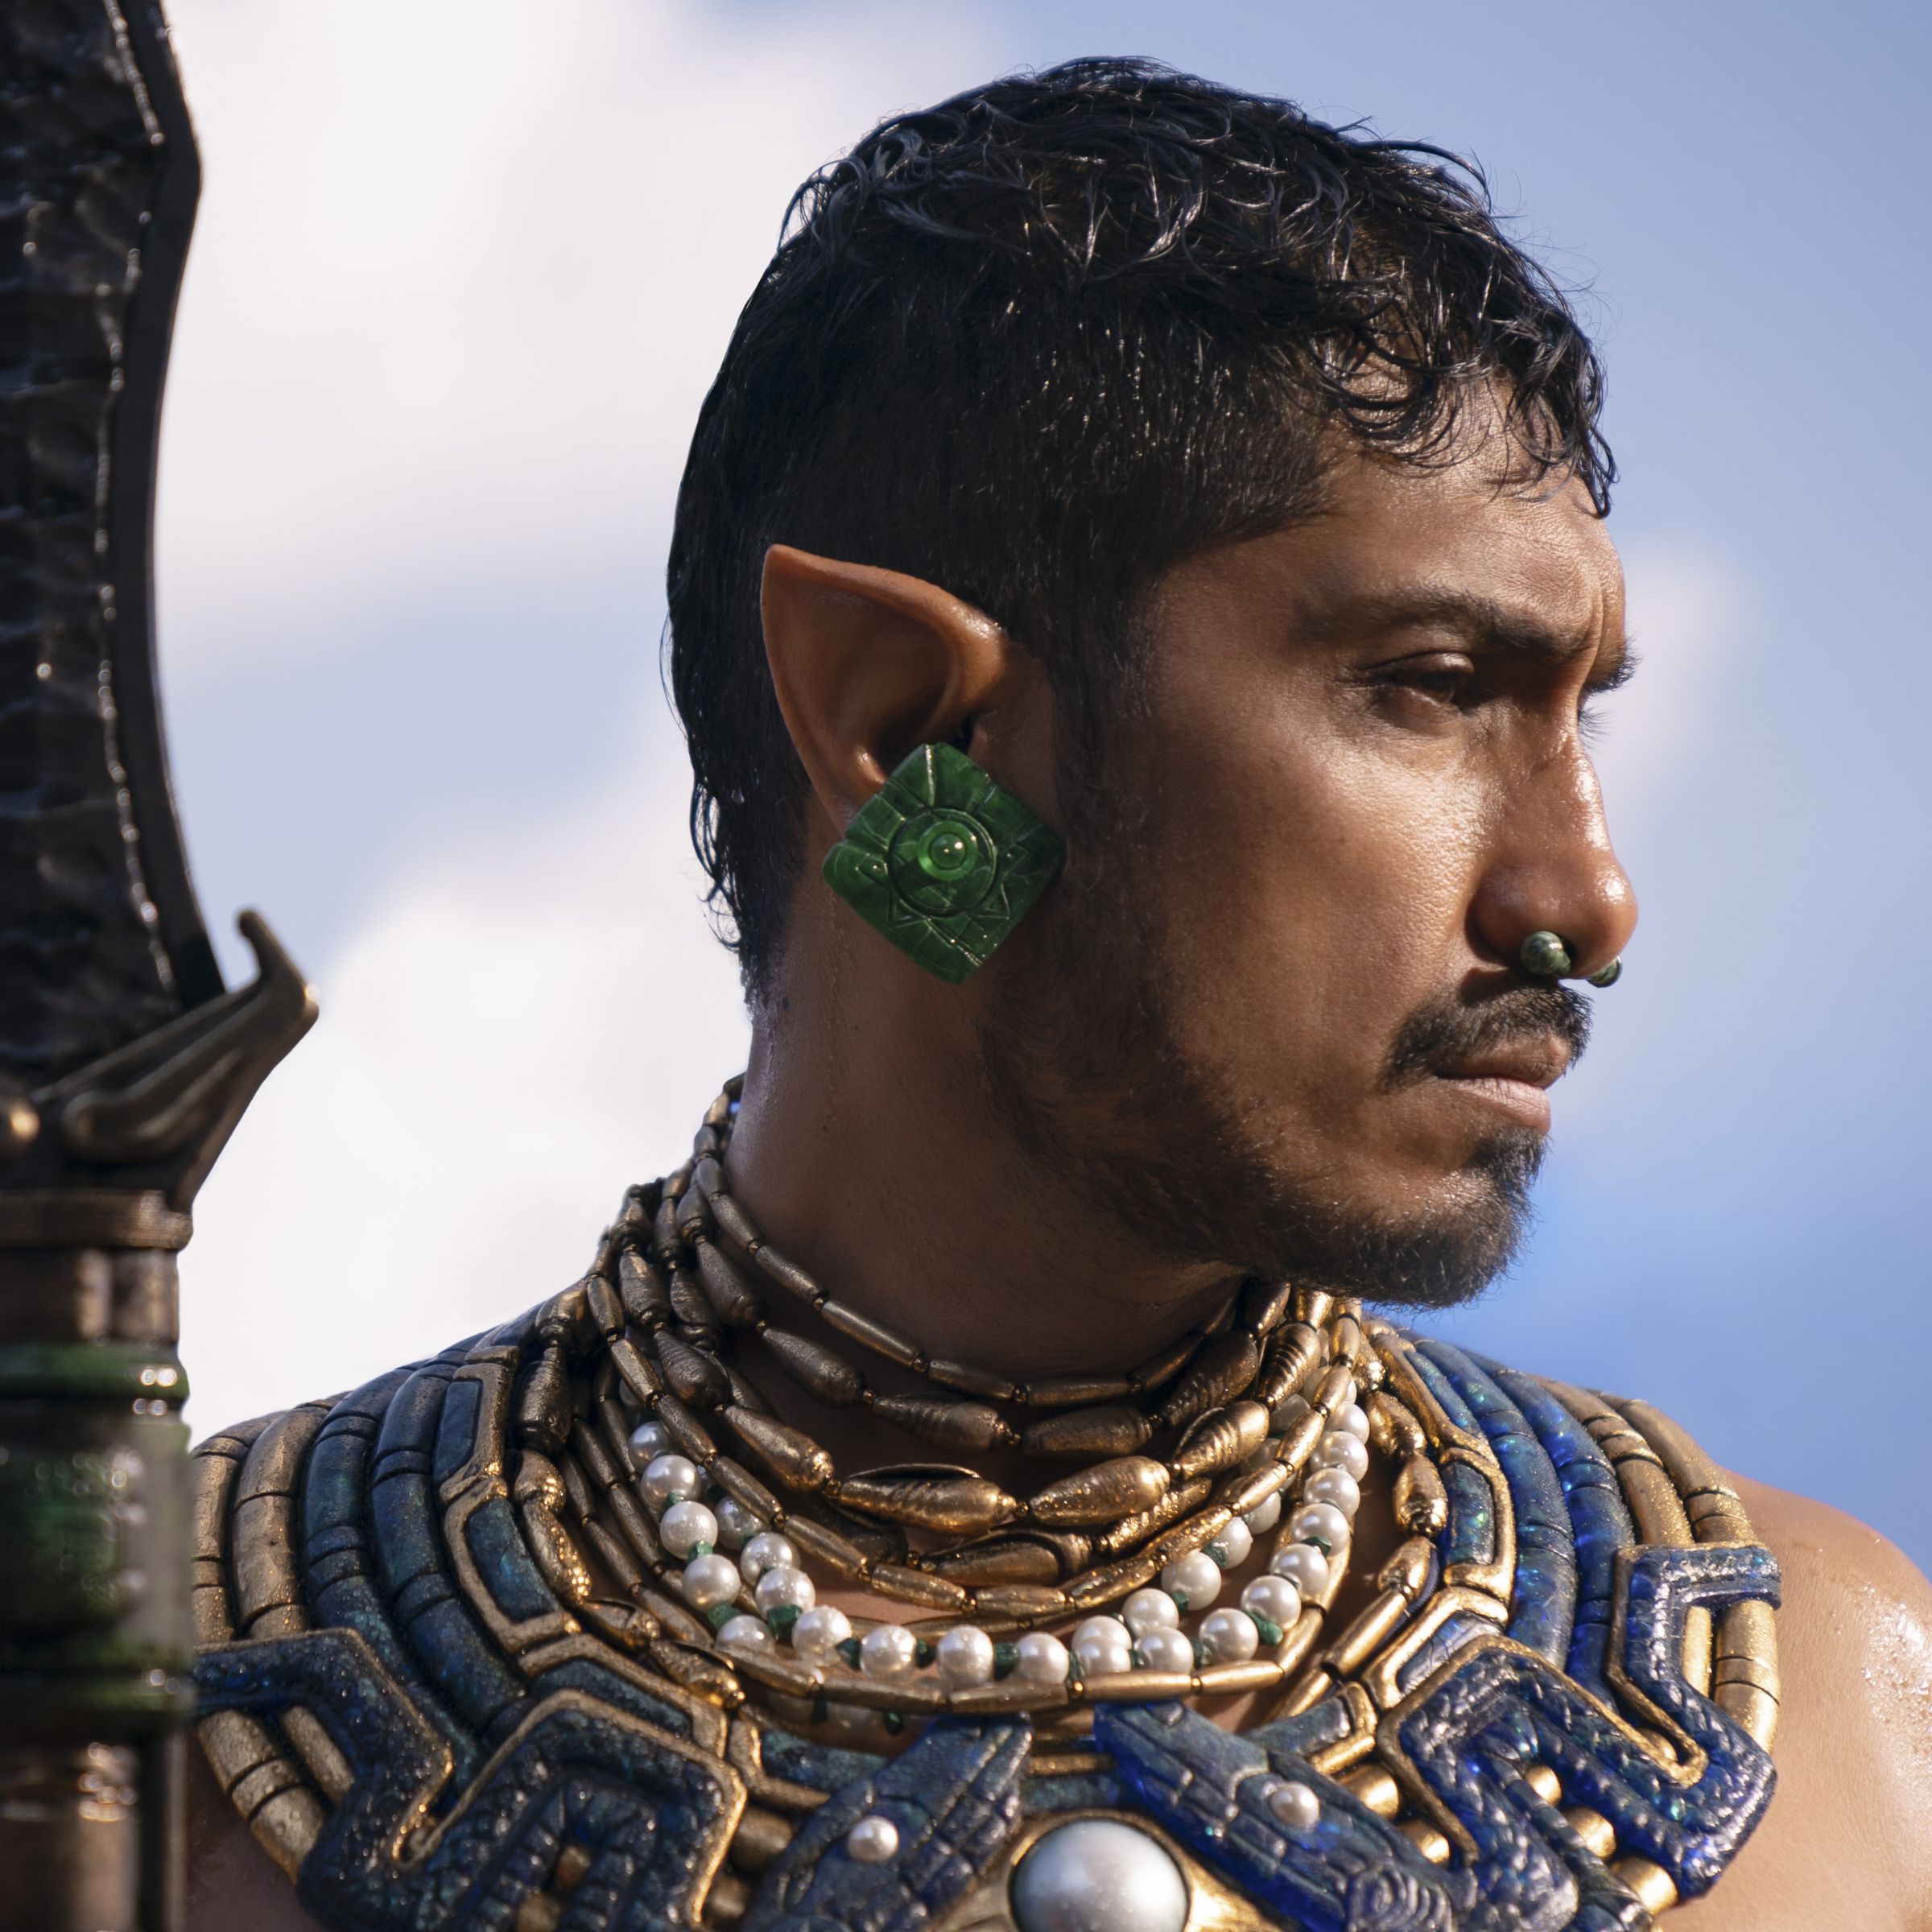 A tight profile shot of a man with pointed ears who is wearing many necklaces featuring intricate beadwork that form a wide collar down his chest. In the foreground is an ornate spear that the man is holding.